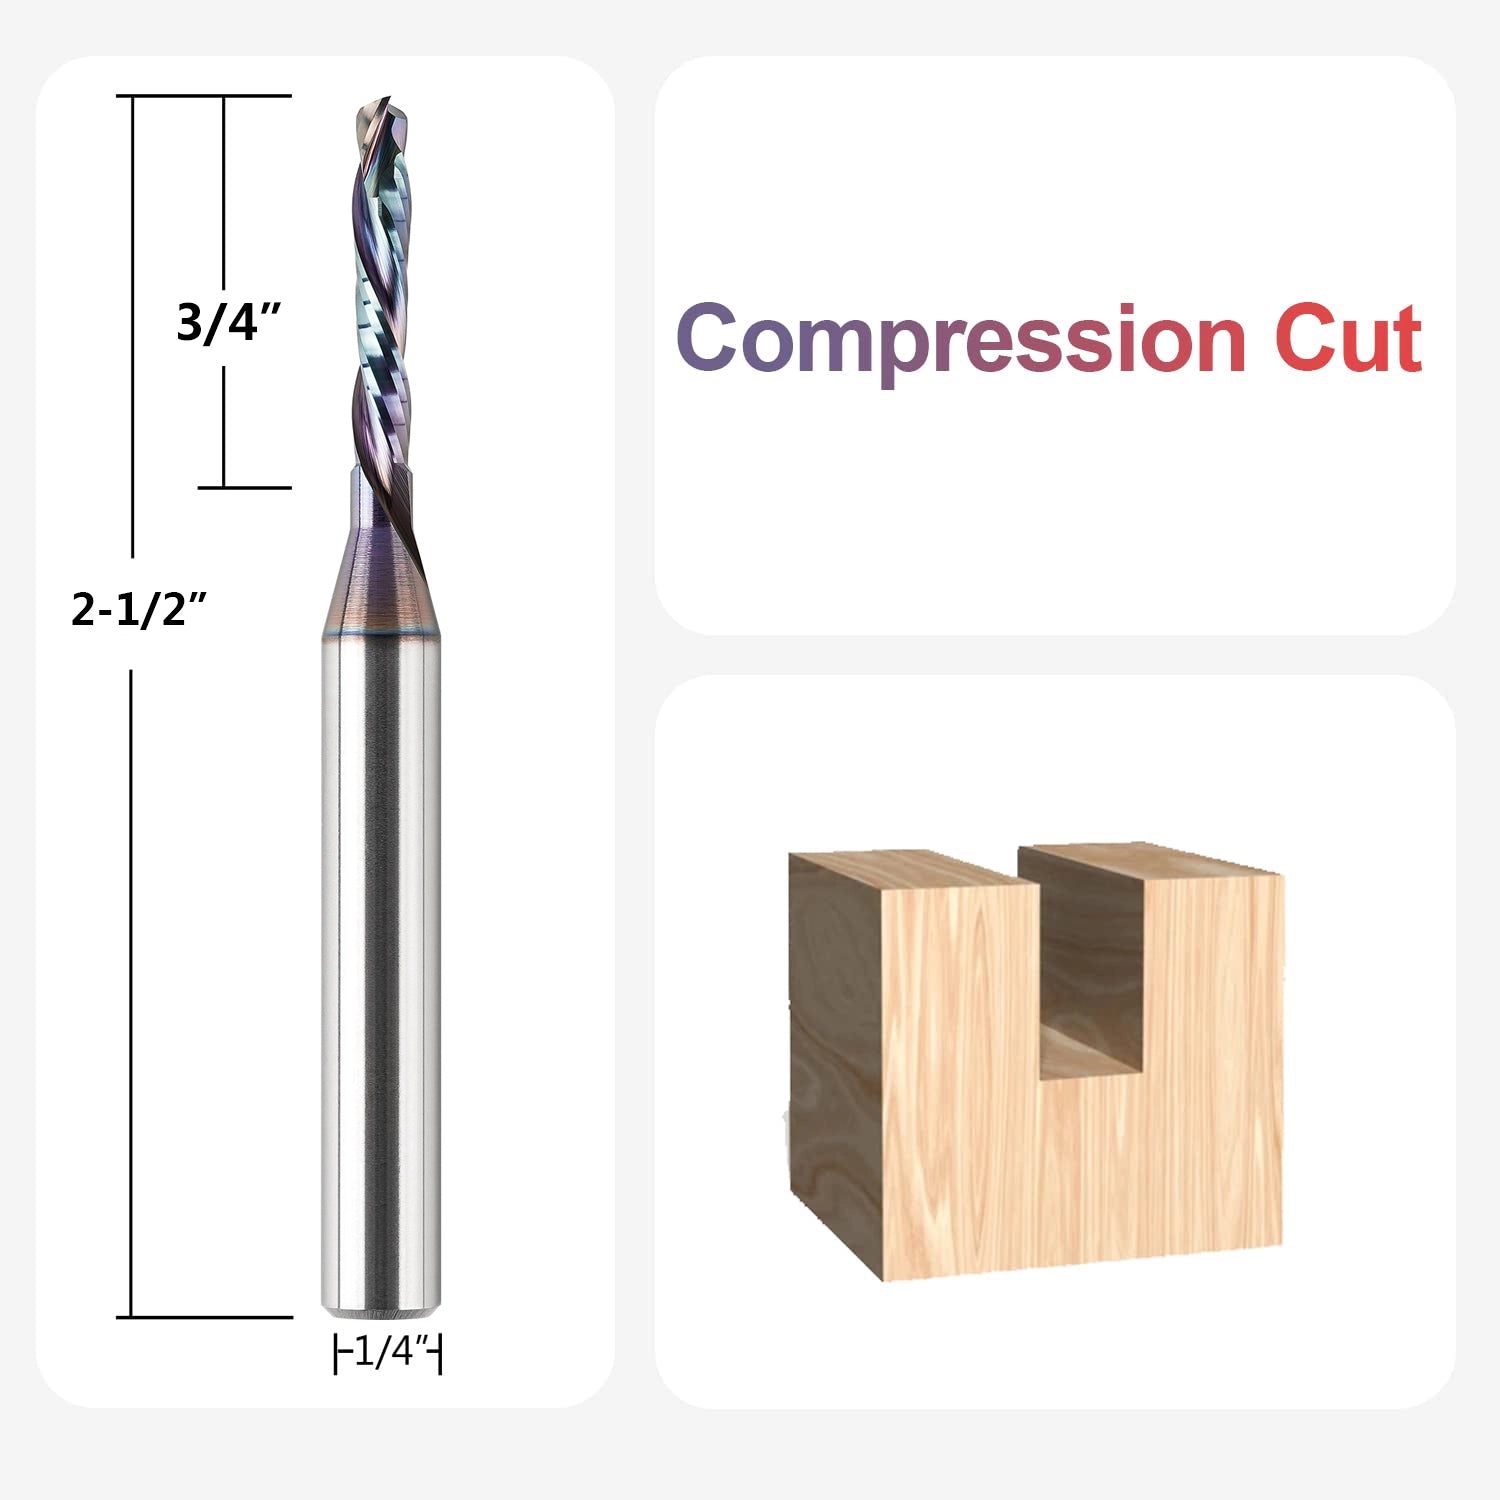 SpeTool 1/8 Dia 1/4 Shank Ultra Long Life Coated Compression Router Bit